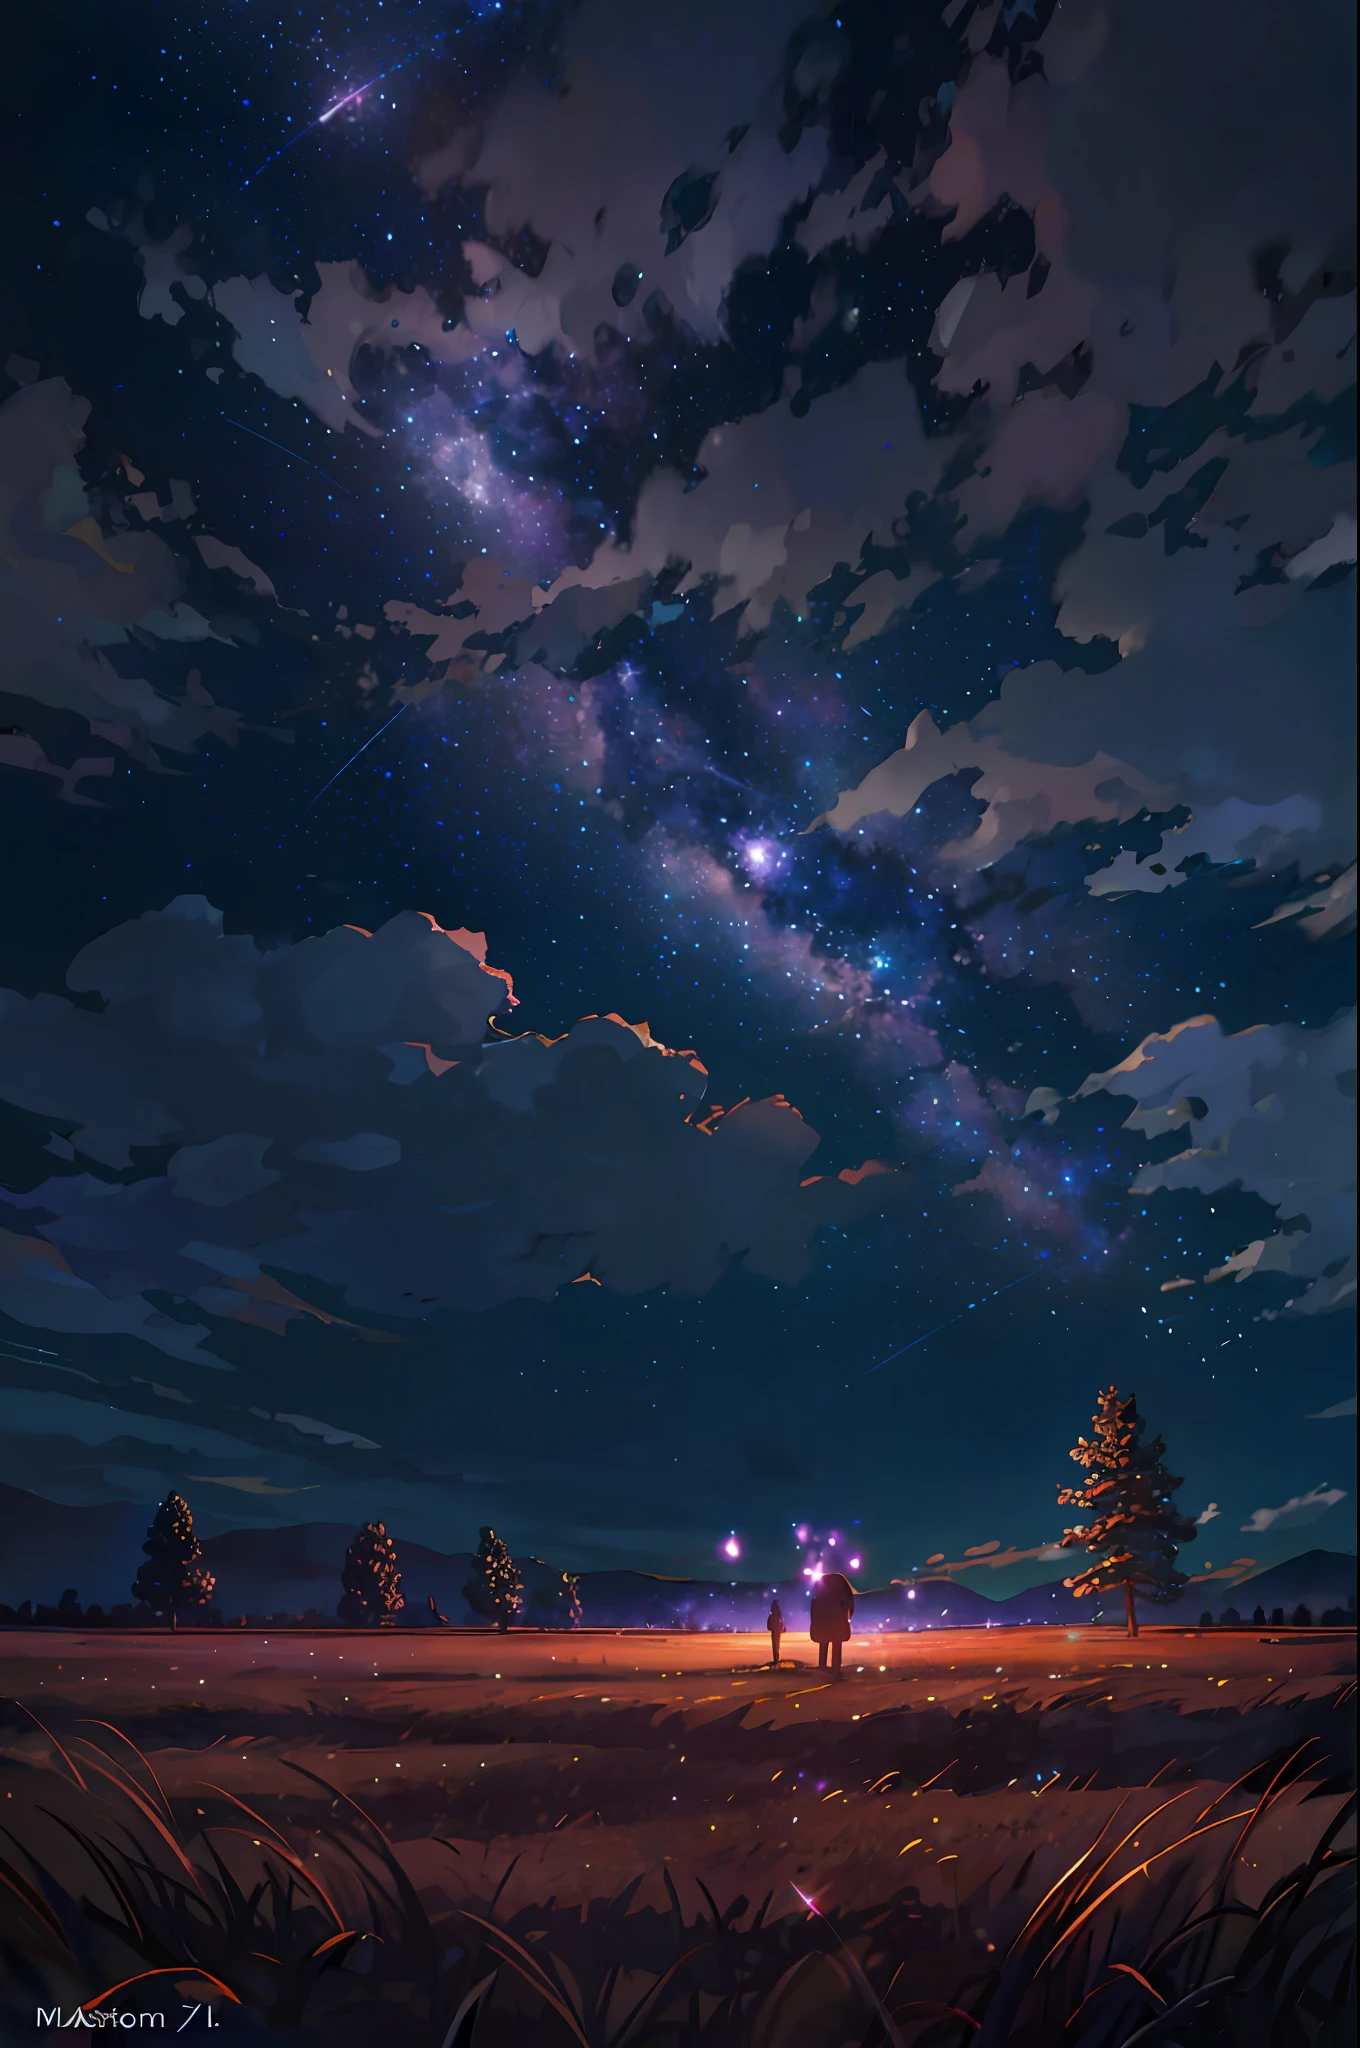 starry night sky with a couple of trees and a field, endless cosmos in the background, cosmic skies. by makoto shinkai, starry sky 8 k, calm night. digital illustration, anime background art, 4k anime wallpaper, beautiful anime scene, starry sky, moonlit starry sky environment, anime art wallpaper 8 k, anime art wallpaper 4k